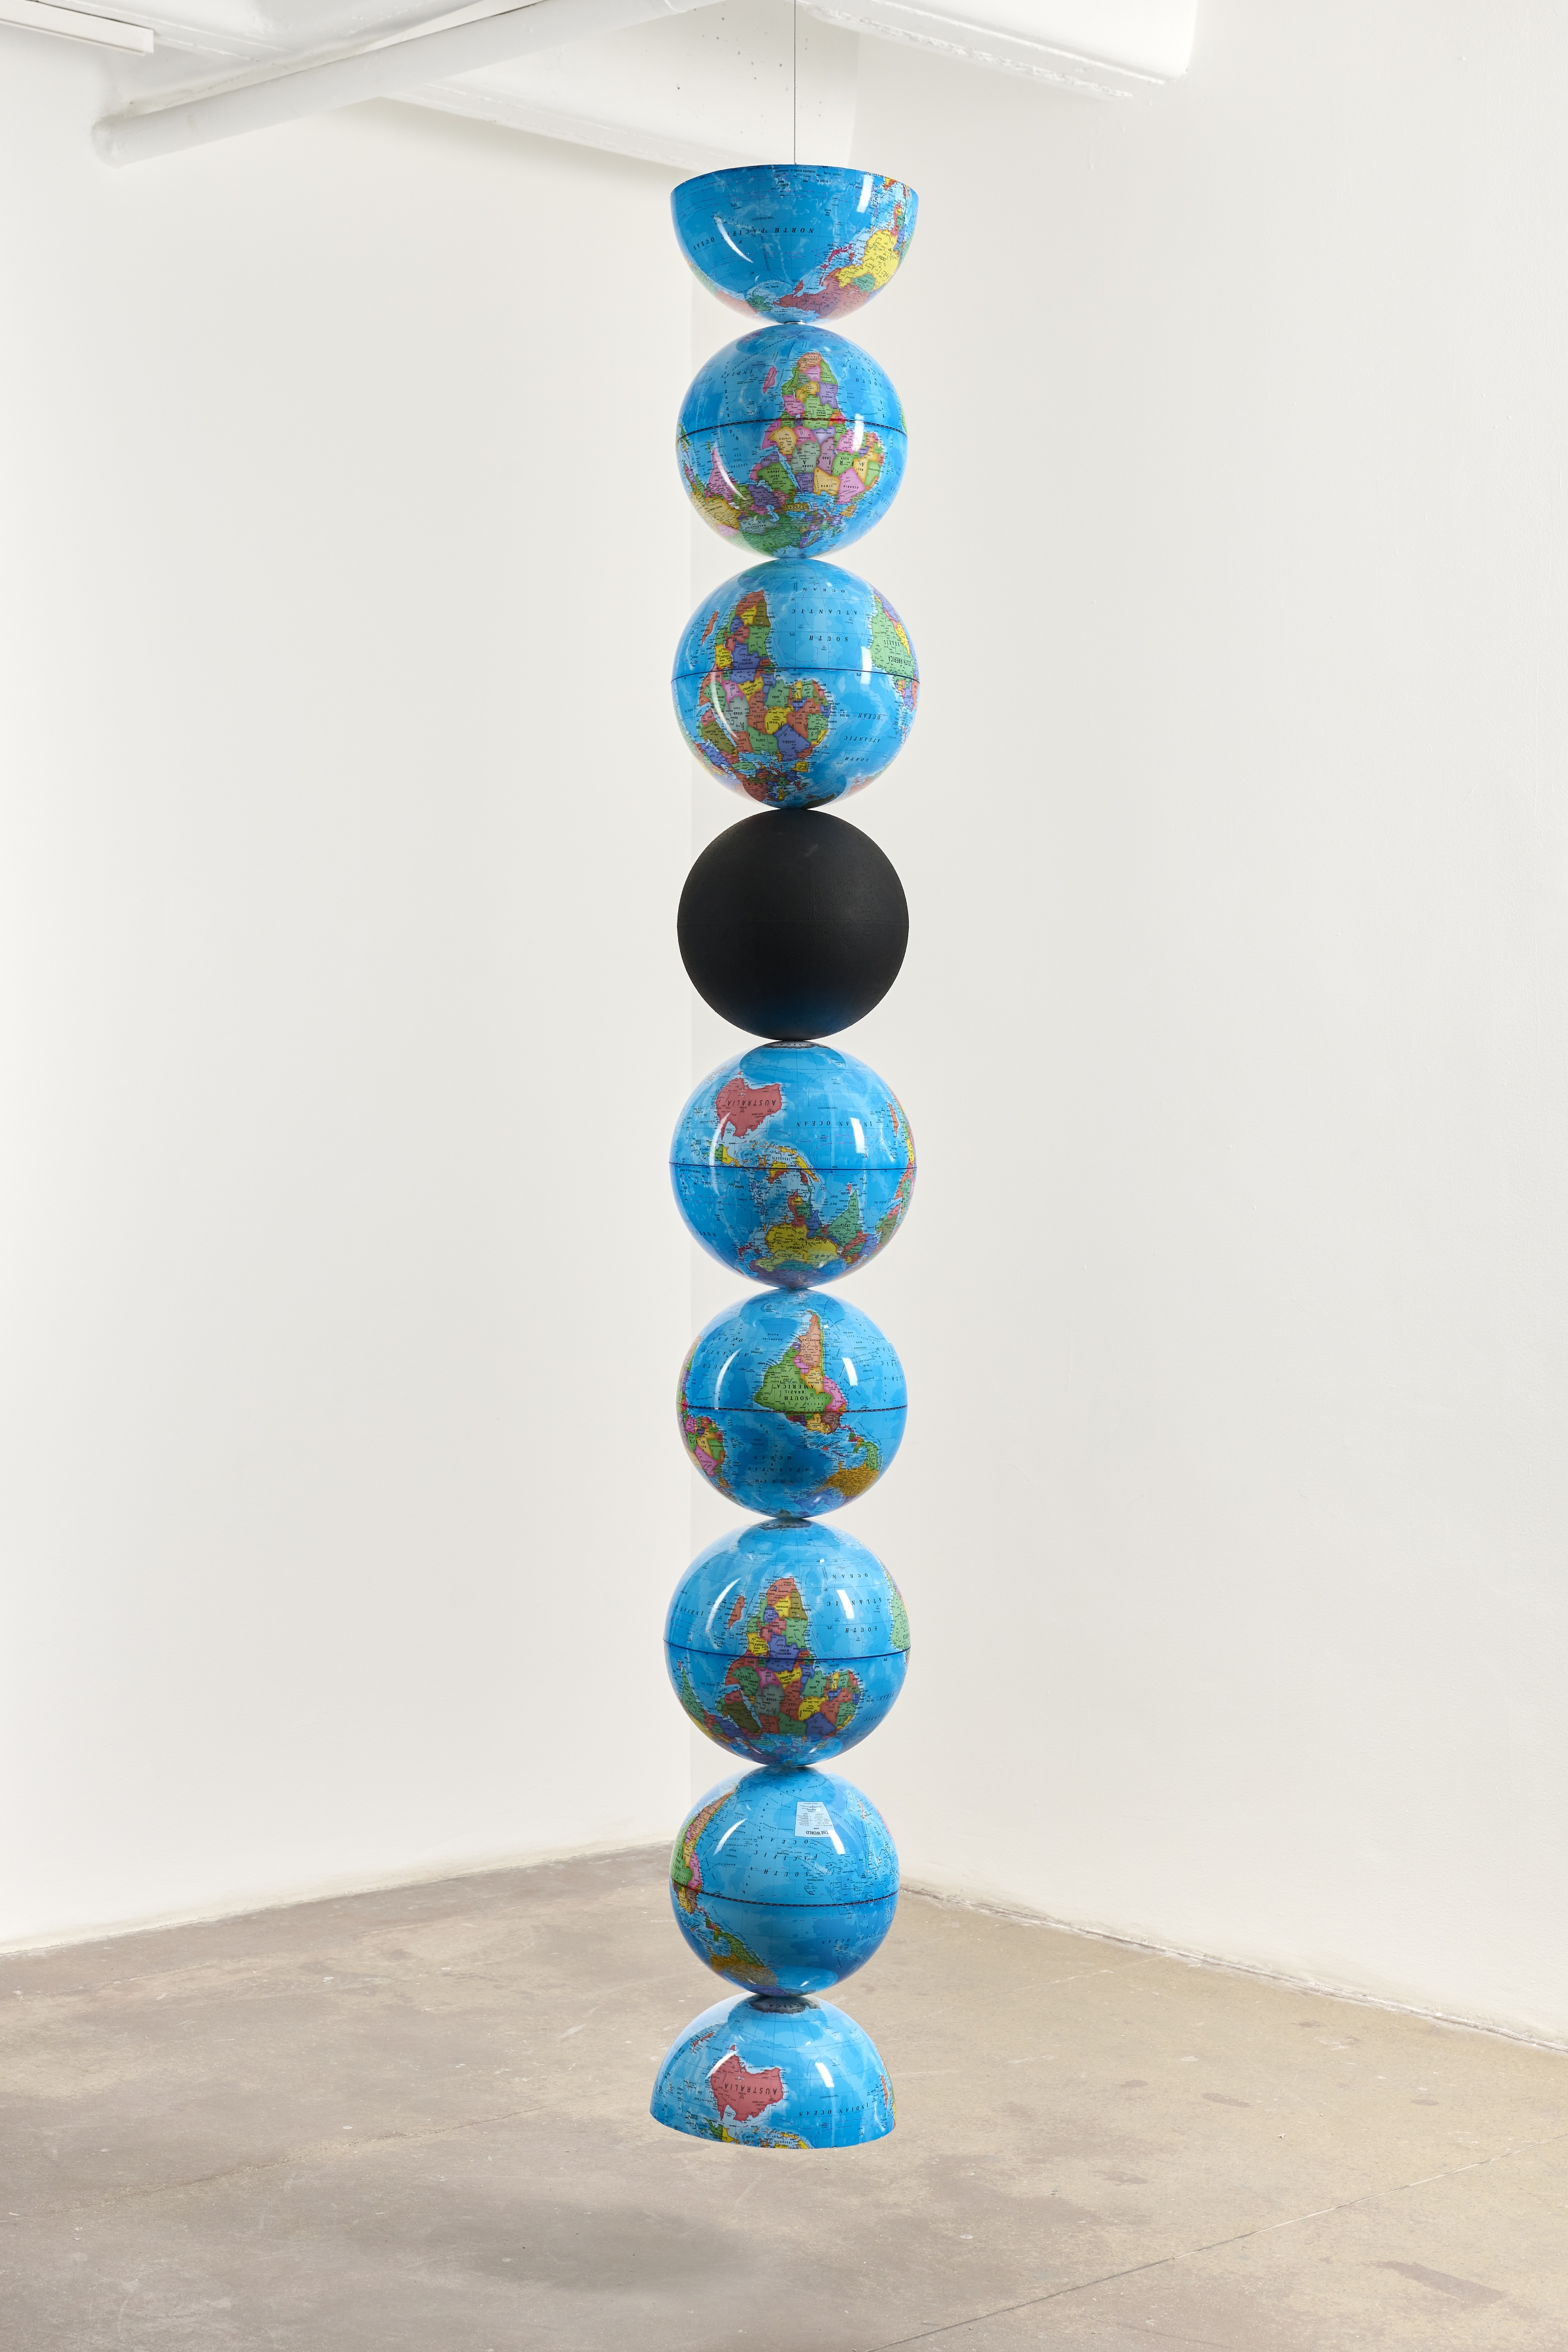 model for an endless column

2021

compound PET plastic globe model, synthetic stone finish, black primer and steel rod

220 x 30 x 30 cm